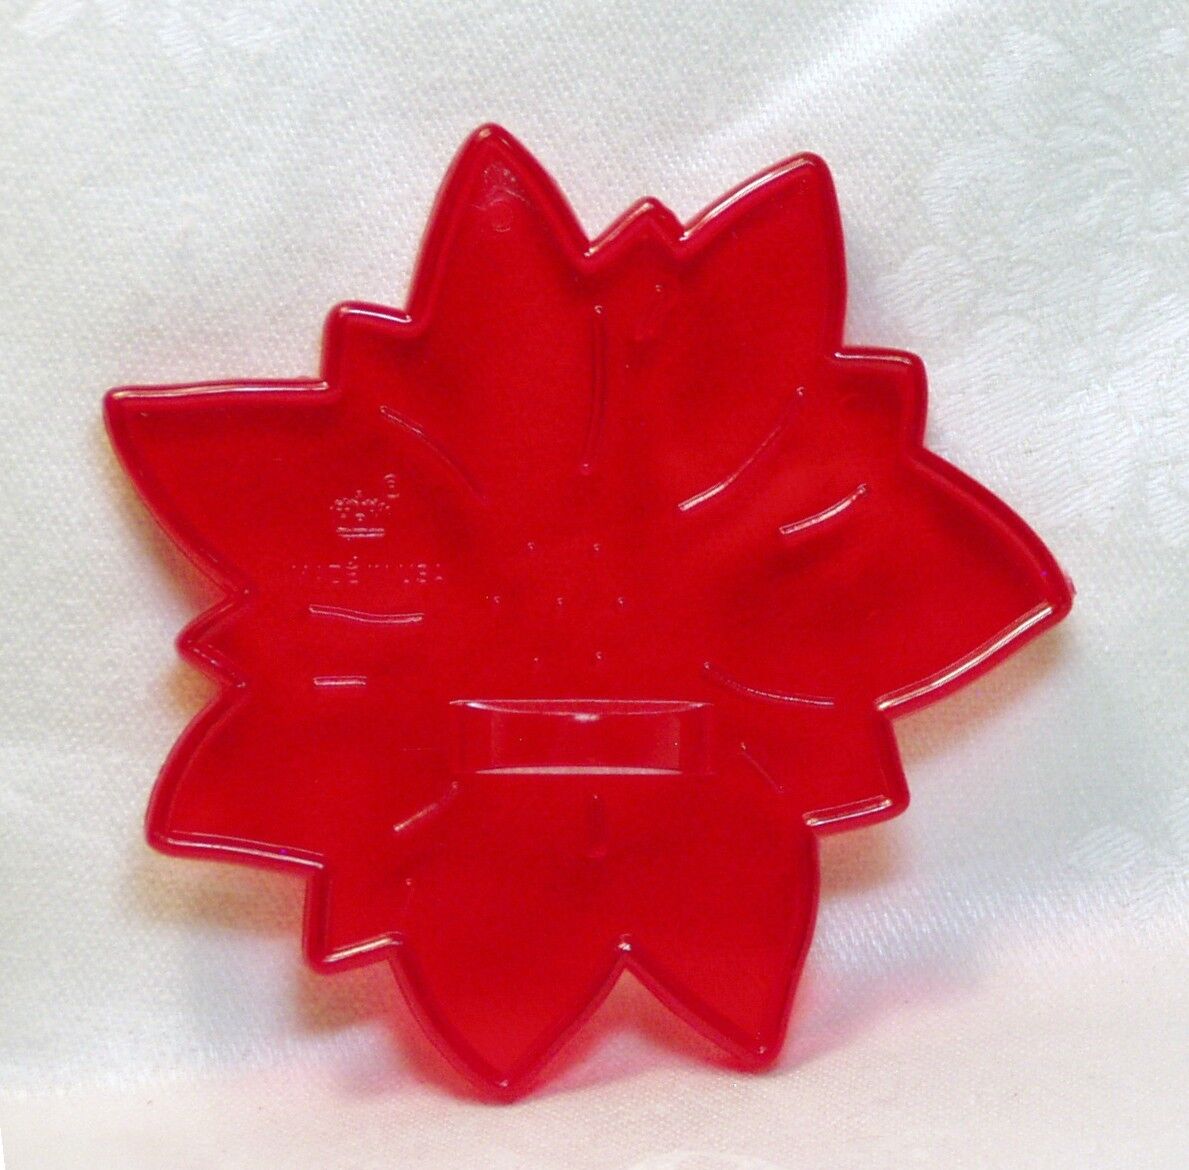 HRM Vintage Design Red Plastic Cookie Cutter - Christmas Poinsettia Bloom Nature